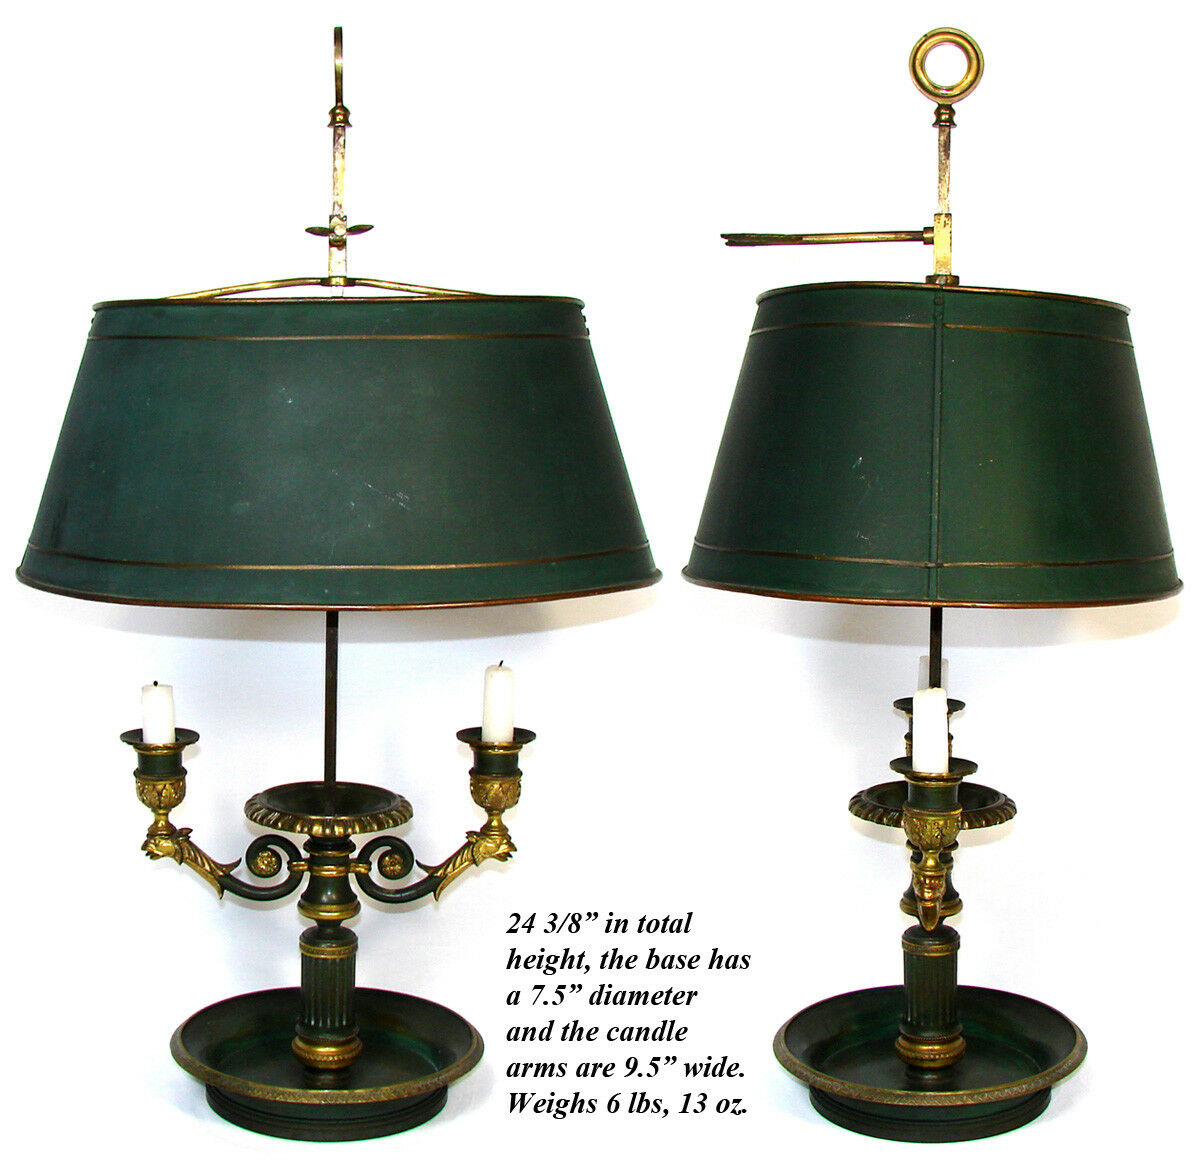 Vintage Heavy Brass Bouillotte-Style Lamp with Shade